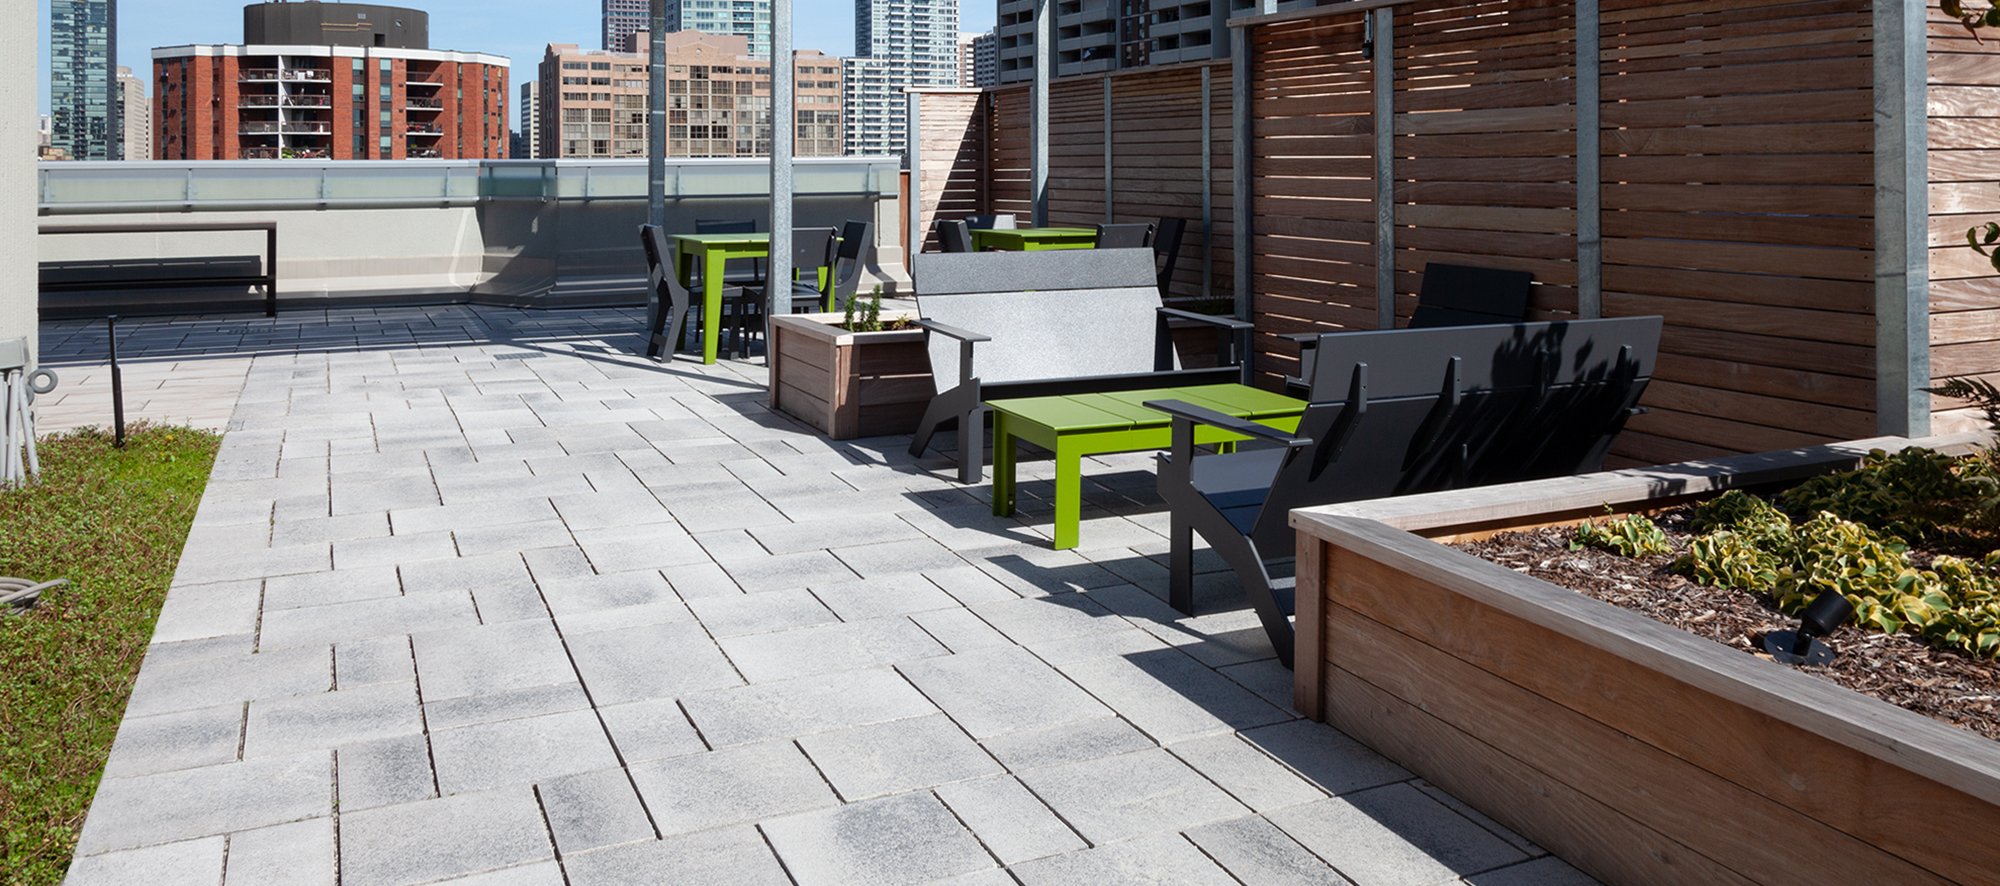 The roof deck at 130 Carlton, Toronto features Umbriano slabs in Winter Marvel by Unilock and a view of the Toronto skyline.